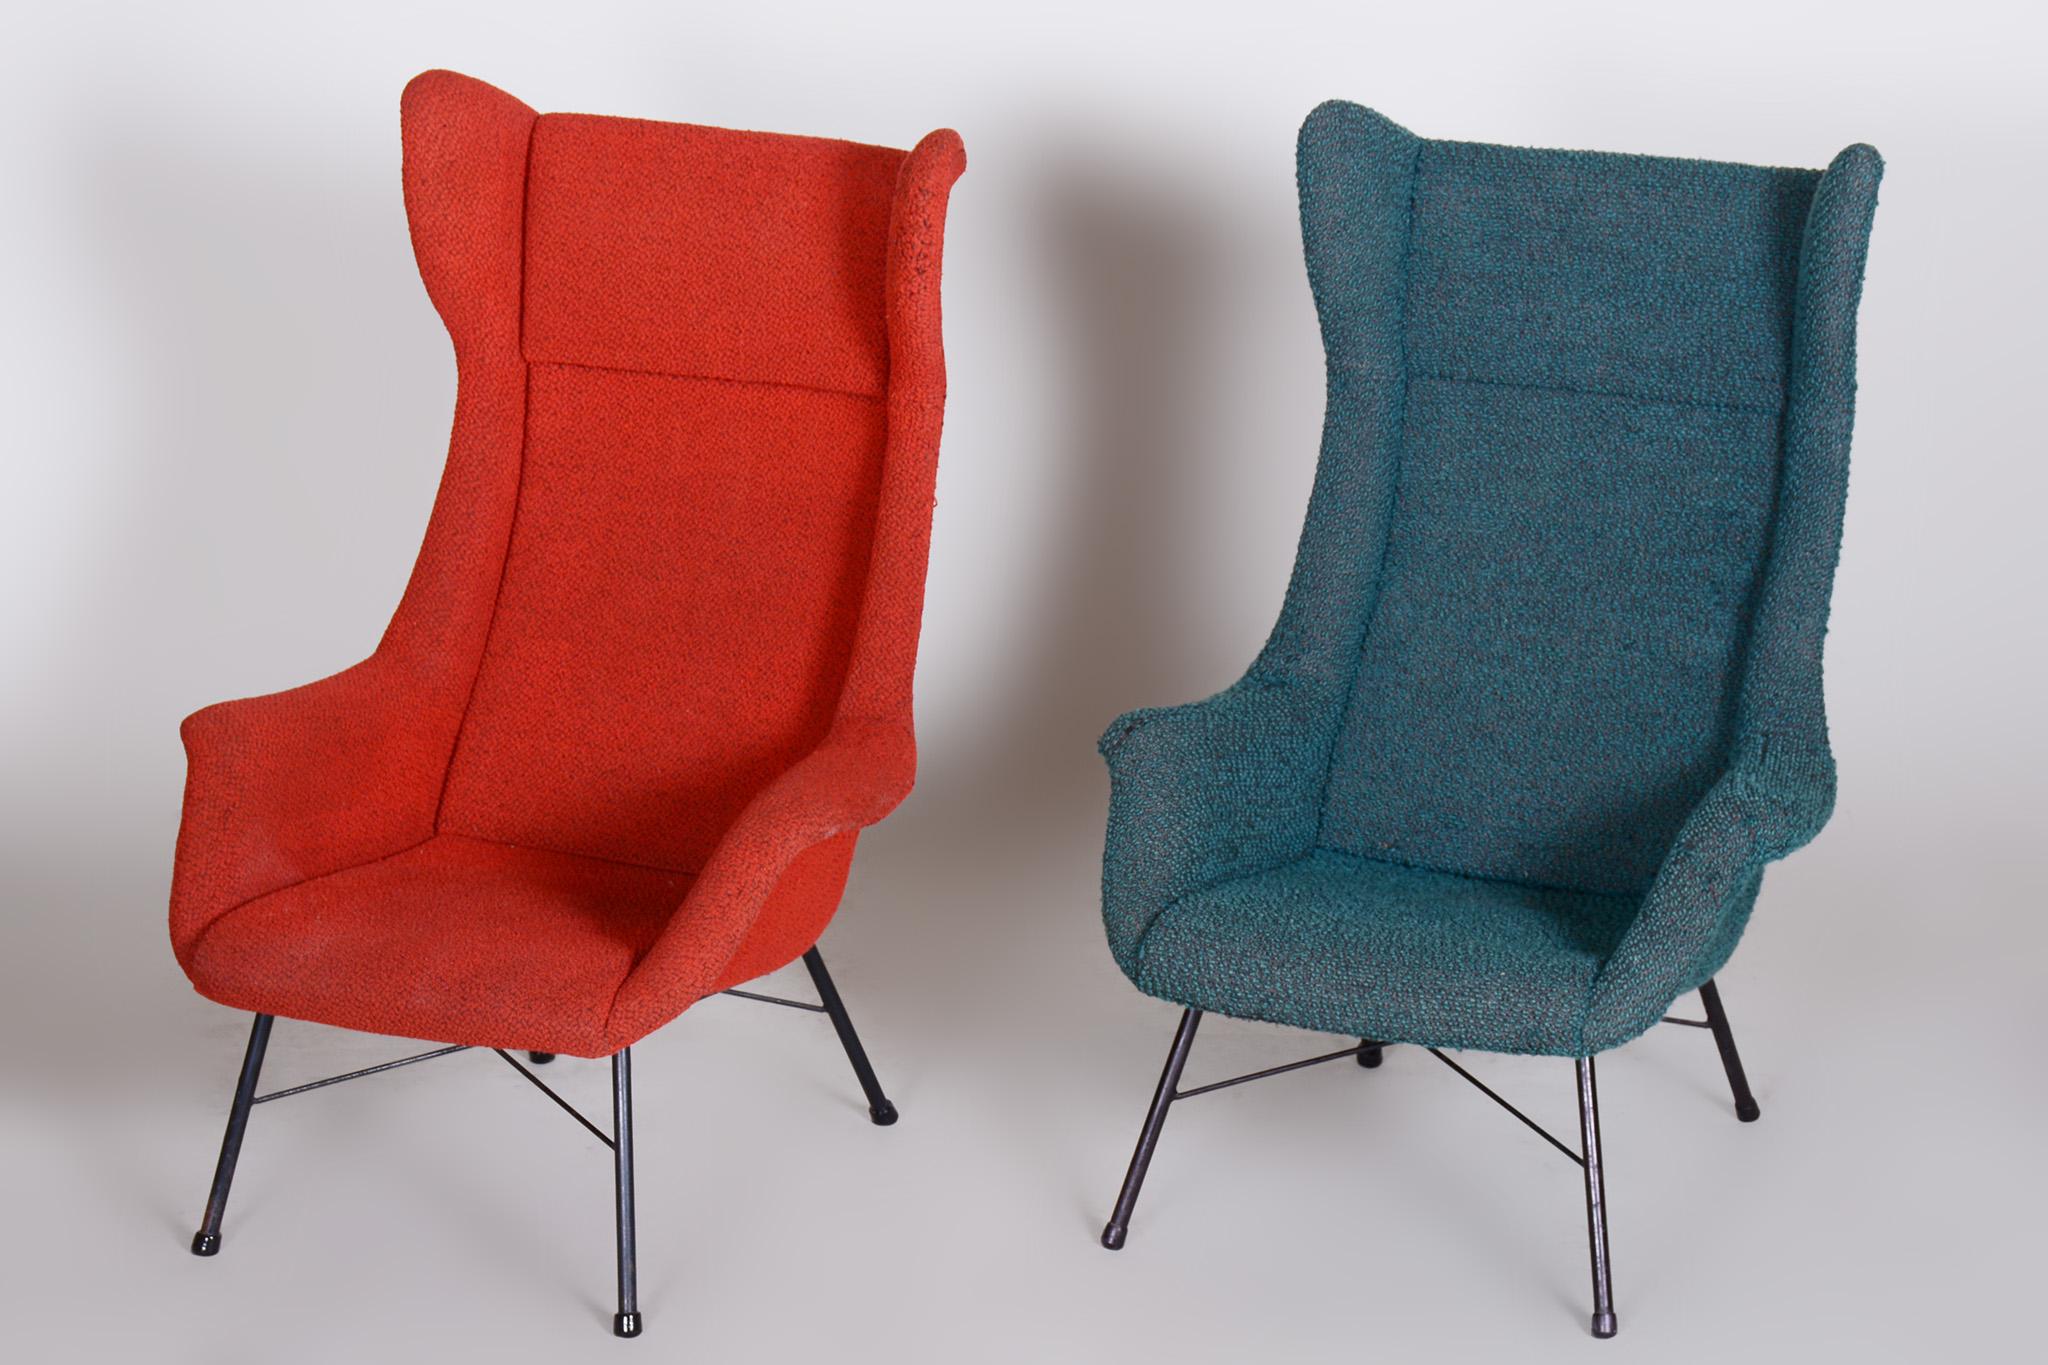 20th Century Pair of Mid Century Armchairs by Miroslav Navratil, Red and Blue, 1950s, Czechia